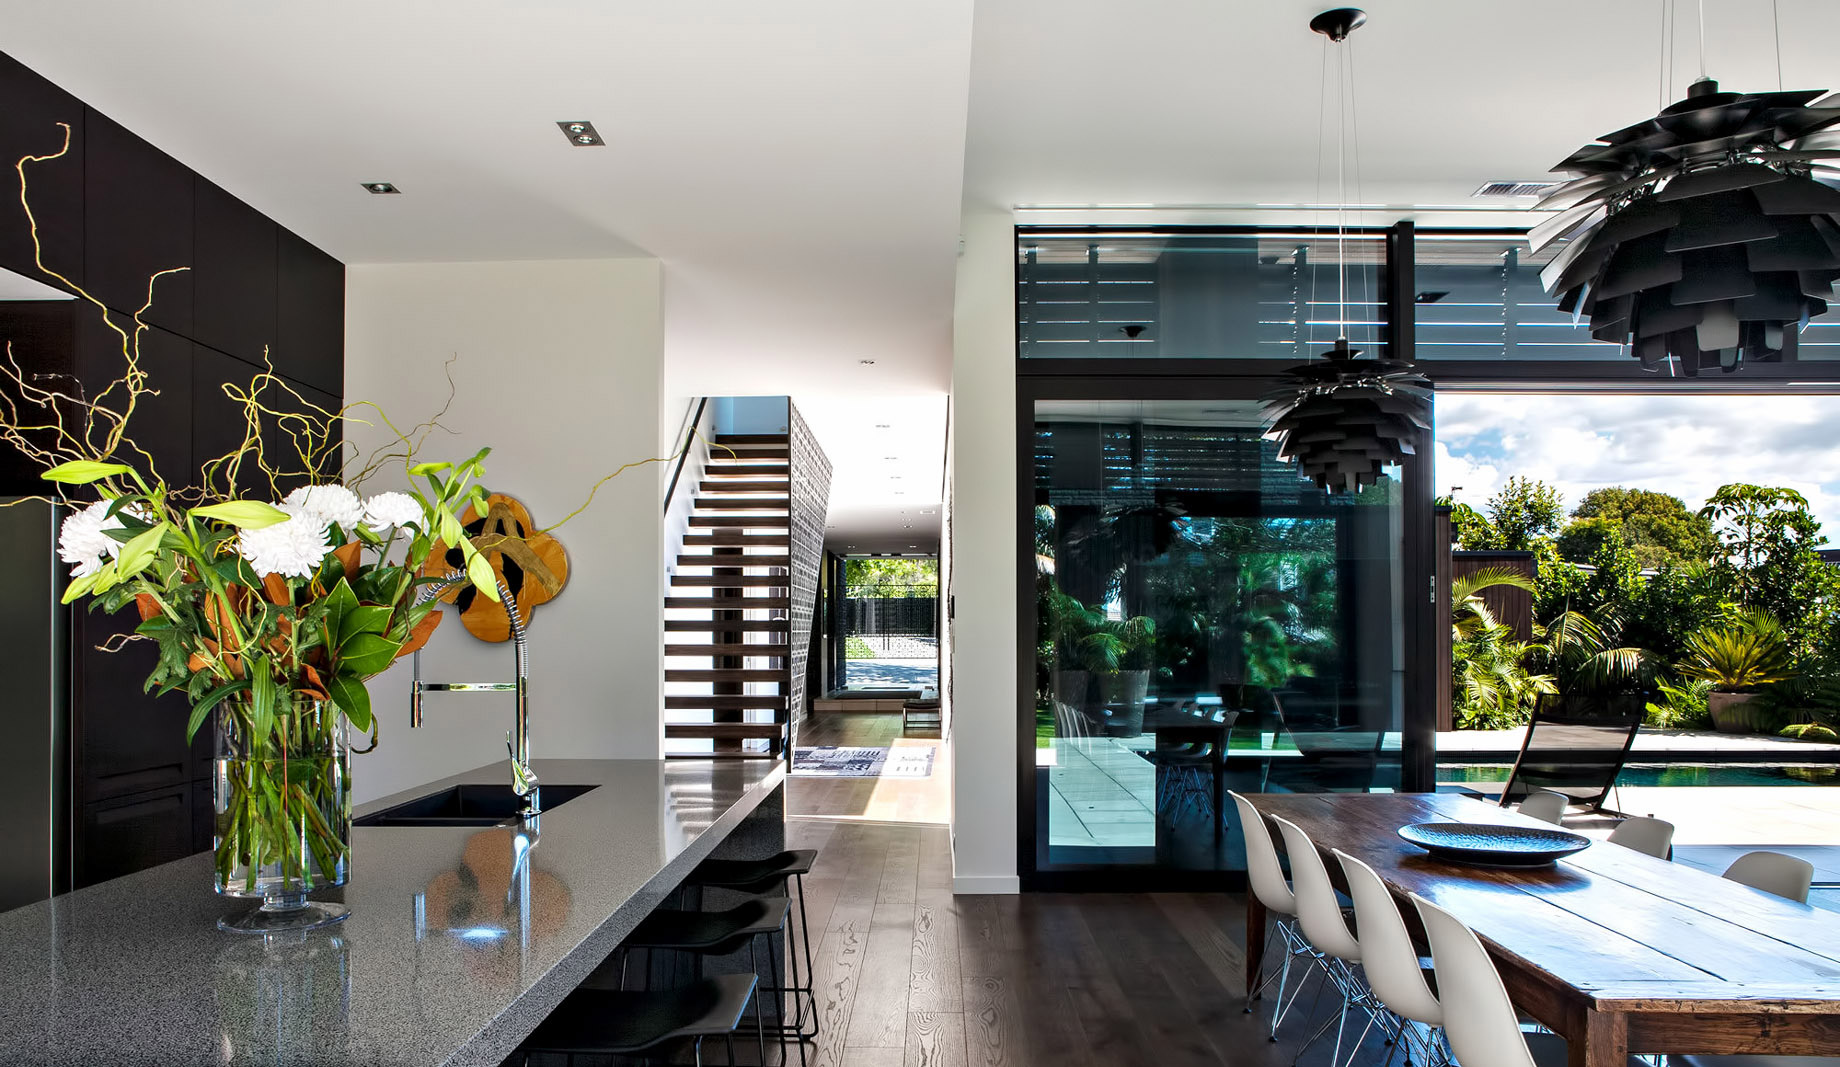 Godden Cres Residence – Mission Bay, Auckland, New Zealand